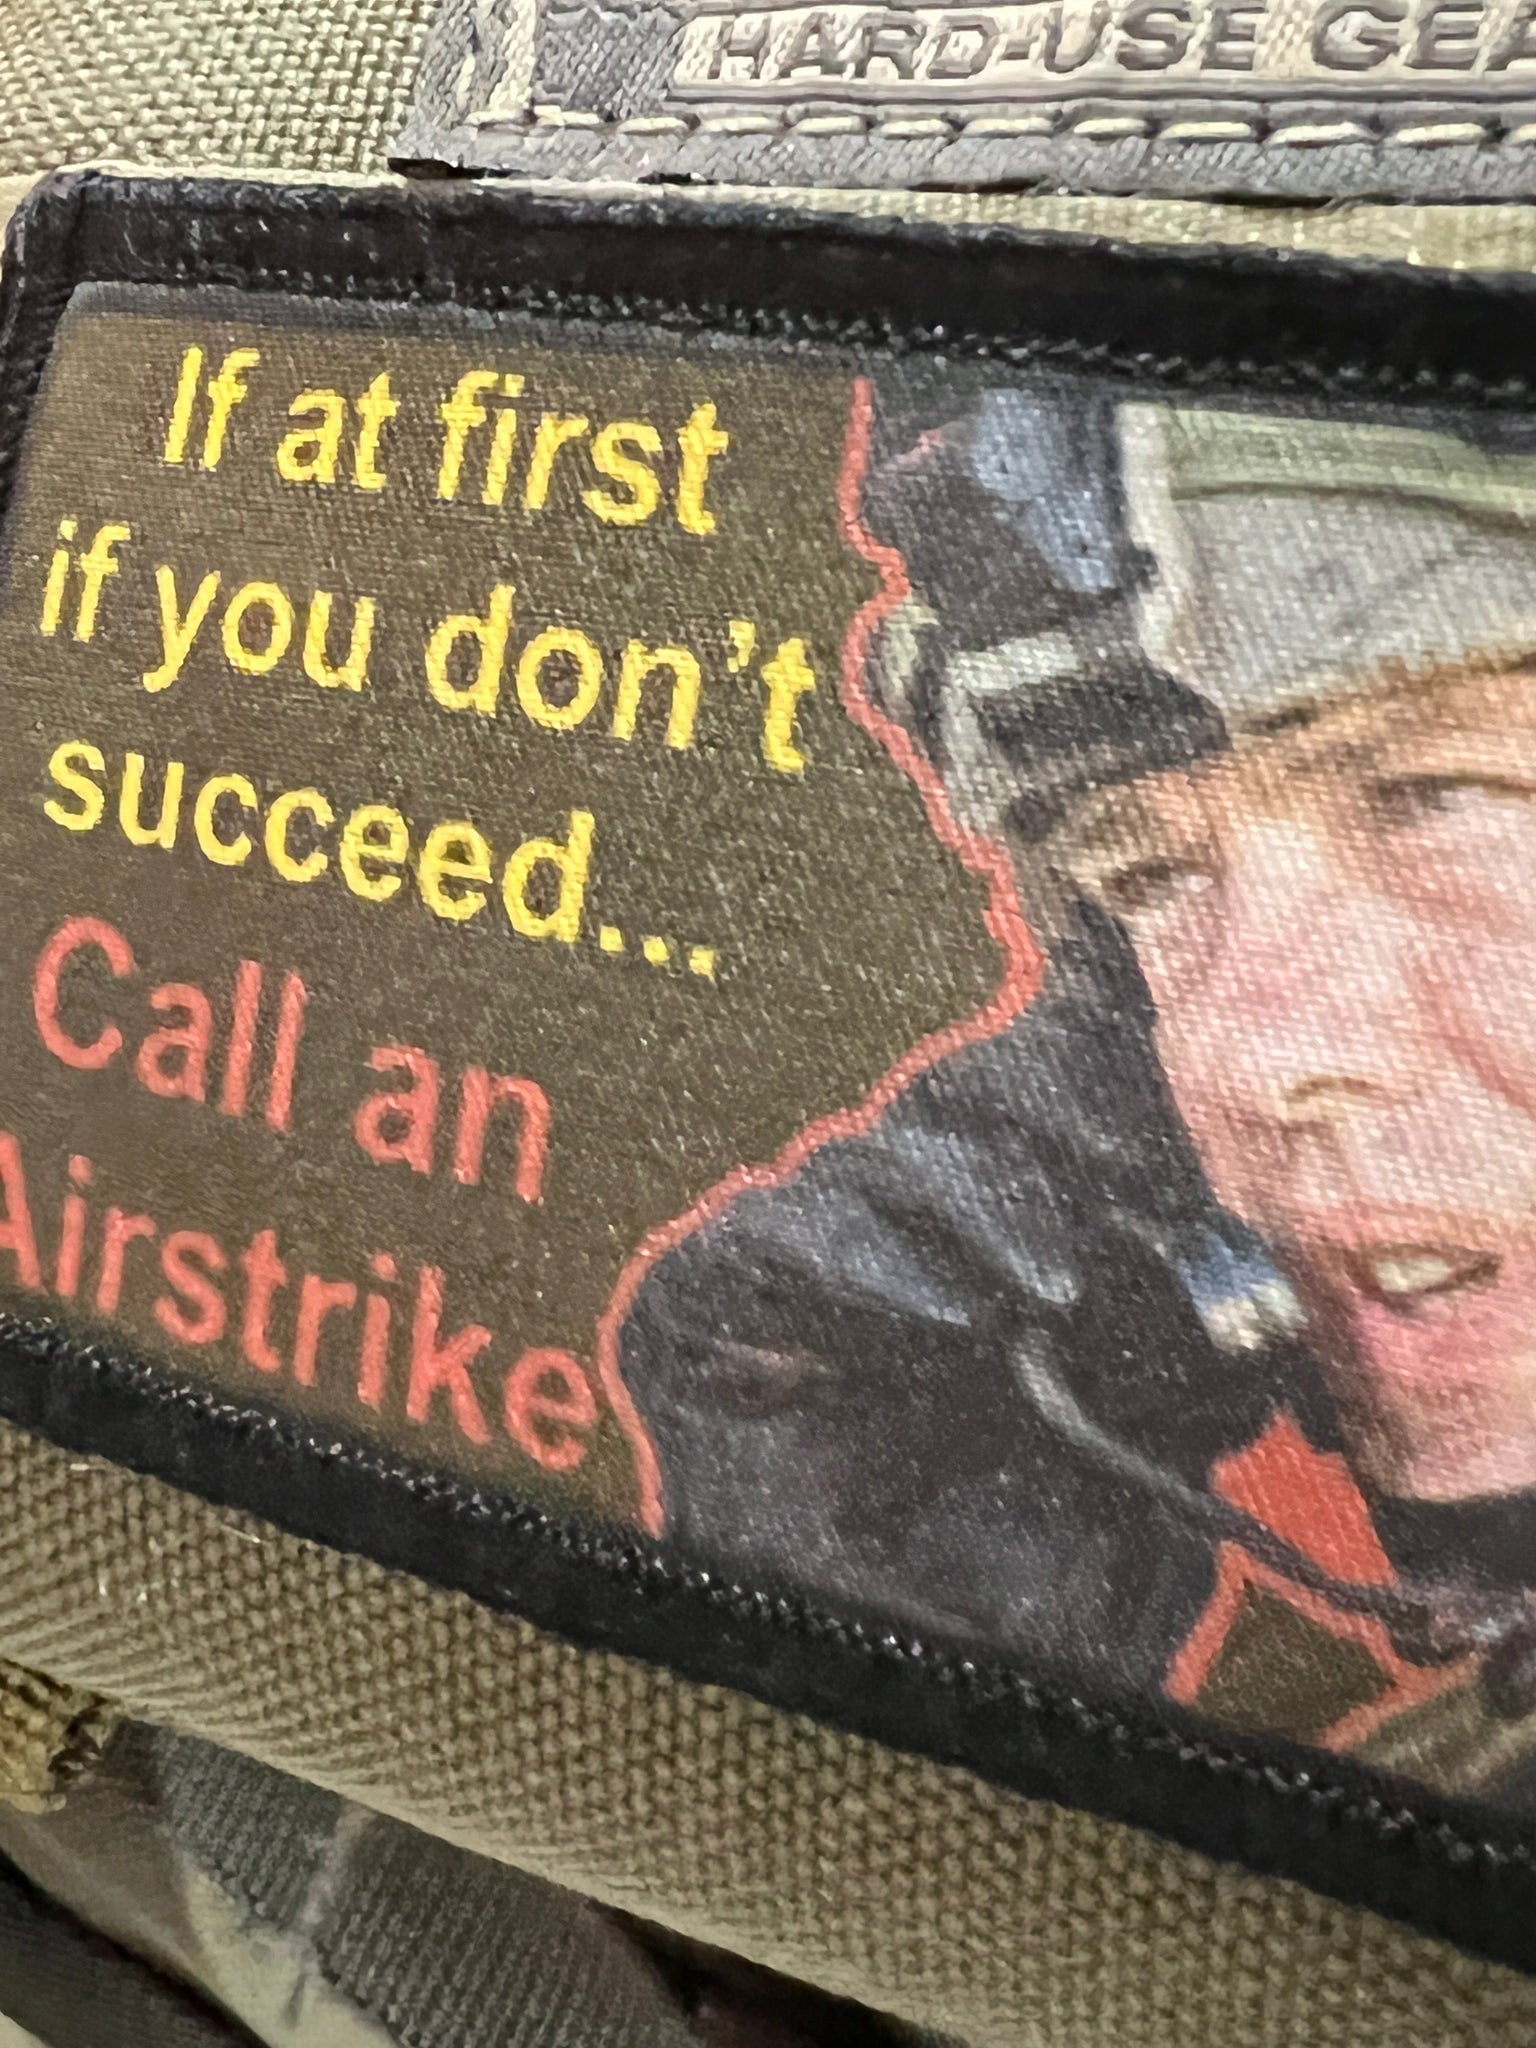 If You Don't Succeed... Call an Airstrike Morale Patch Morale Patches Redheaded T Shirts 